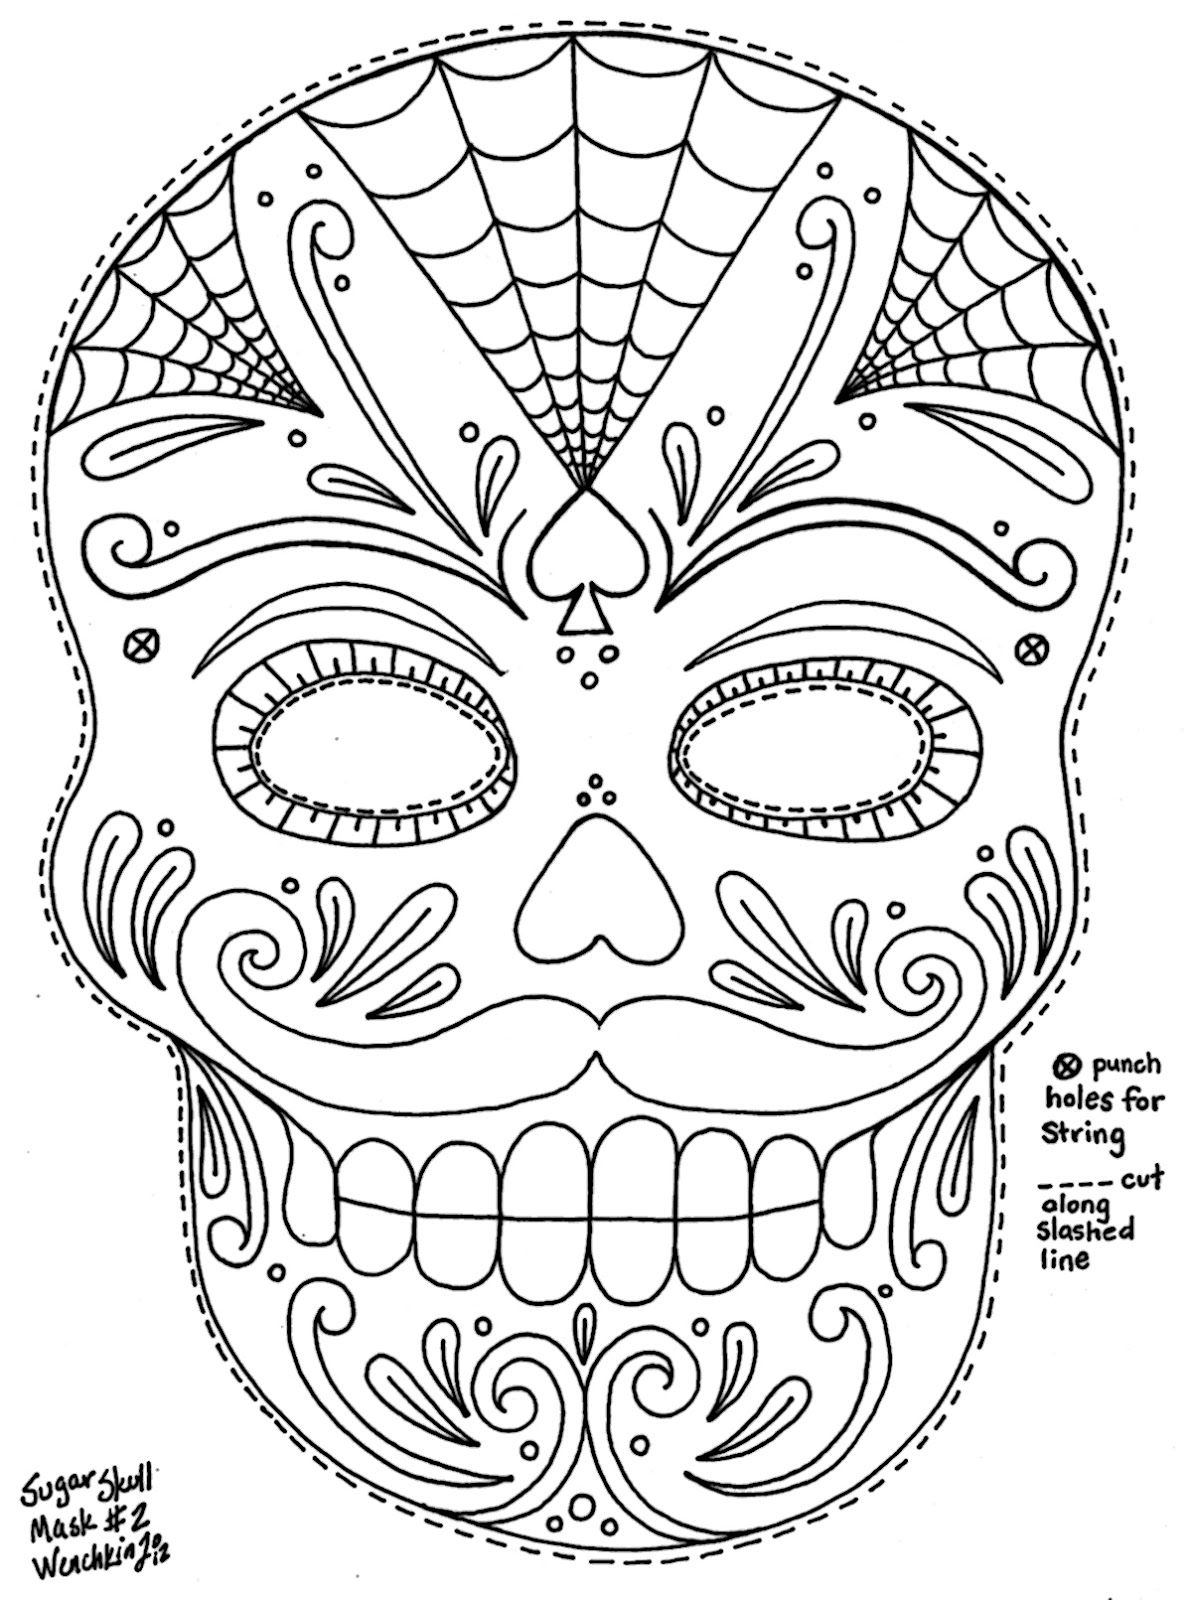 Wenchkins coloring pages